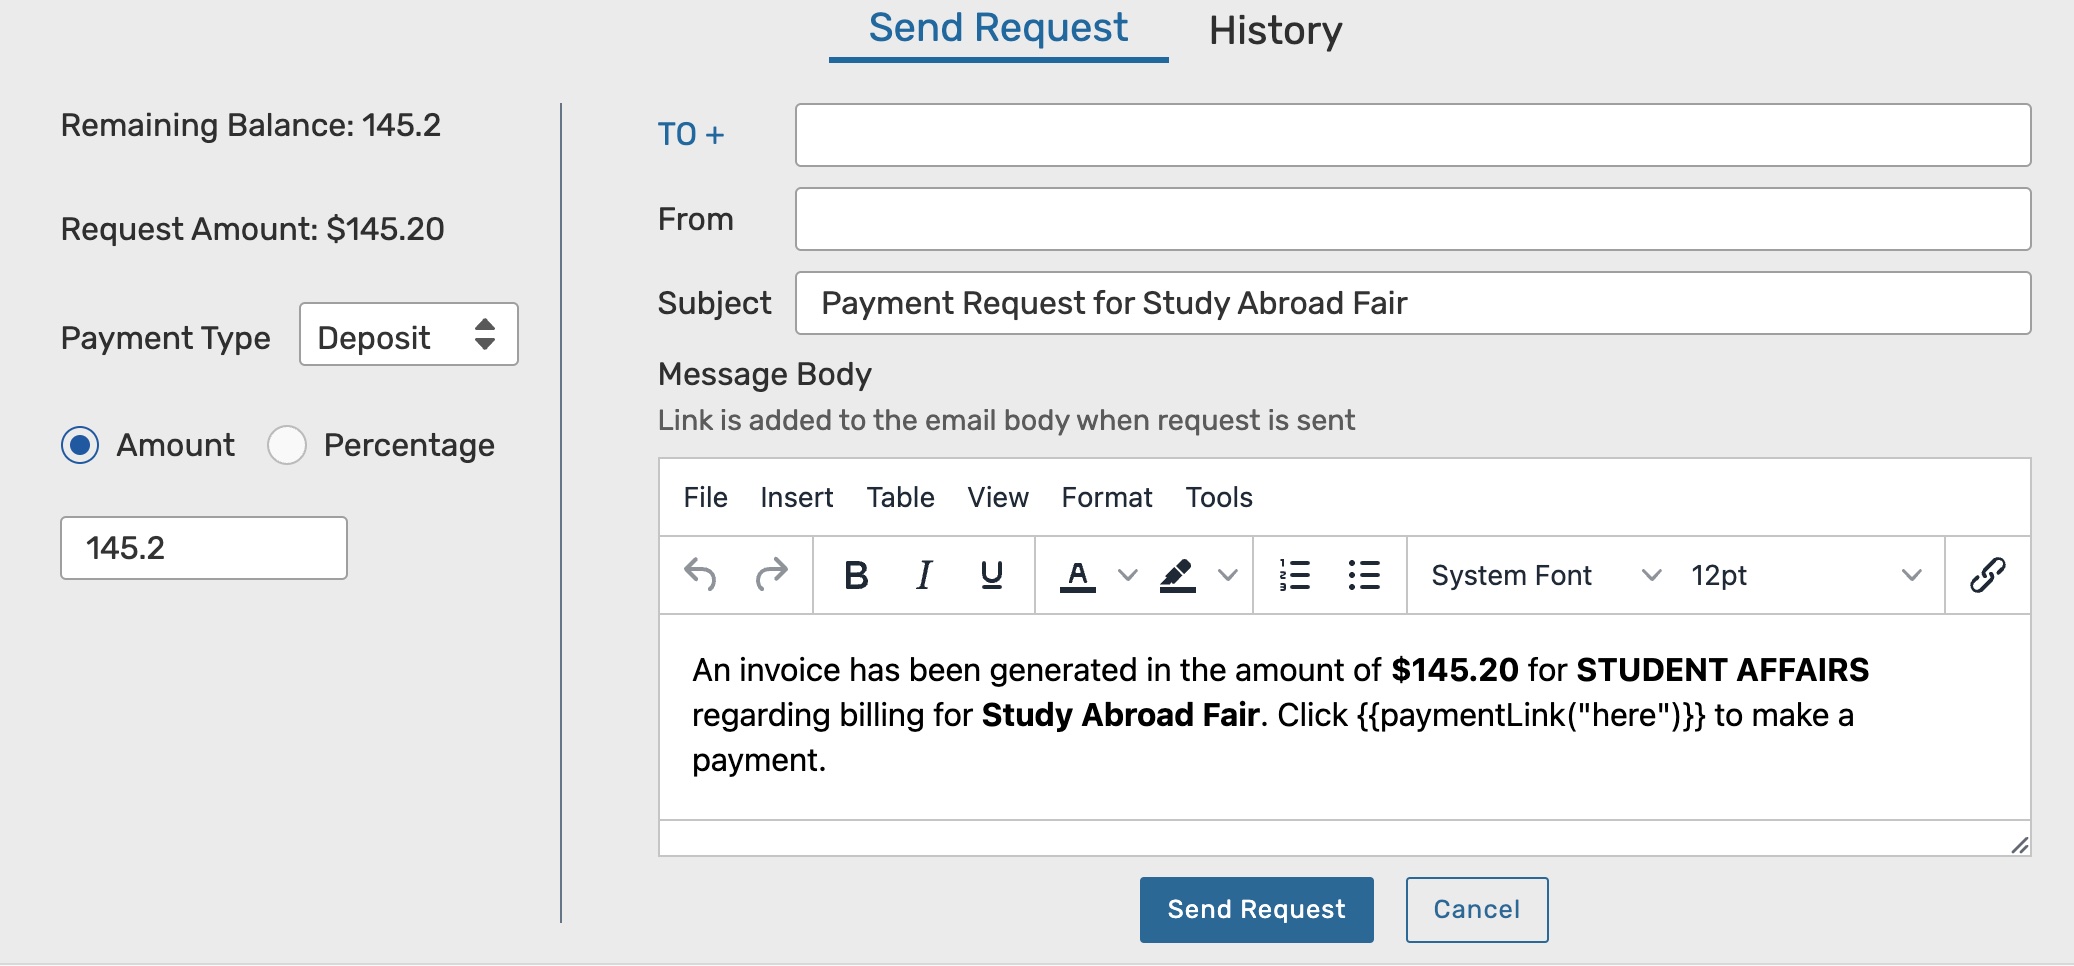 The payment information is on the left side of the send request tab